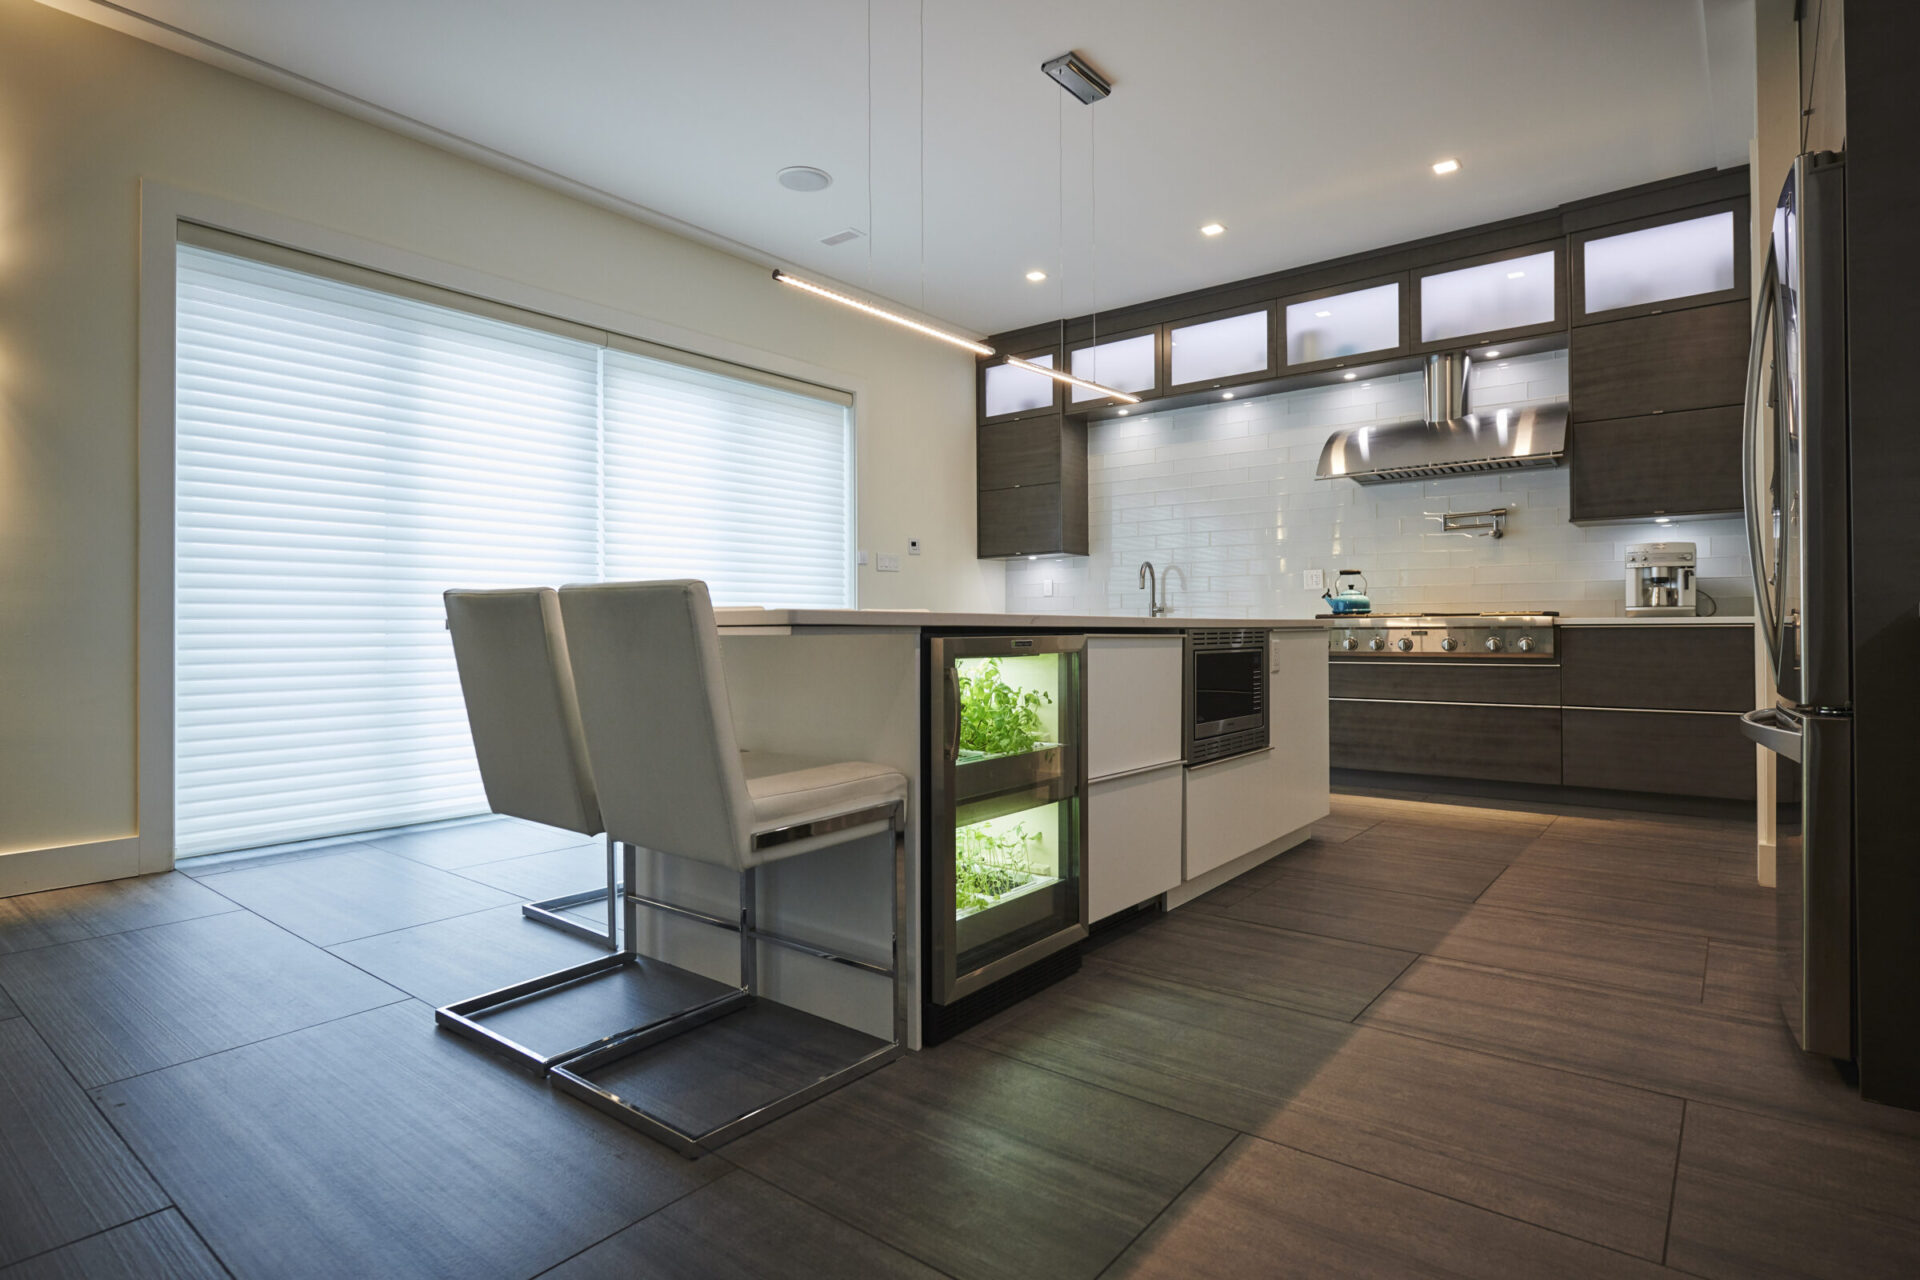 A modern kitchen with dark cabinetry, integrated appliances, an under-cabinet lighting system, a dining area, and an indoor plant cultivation cabinet.